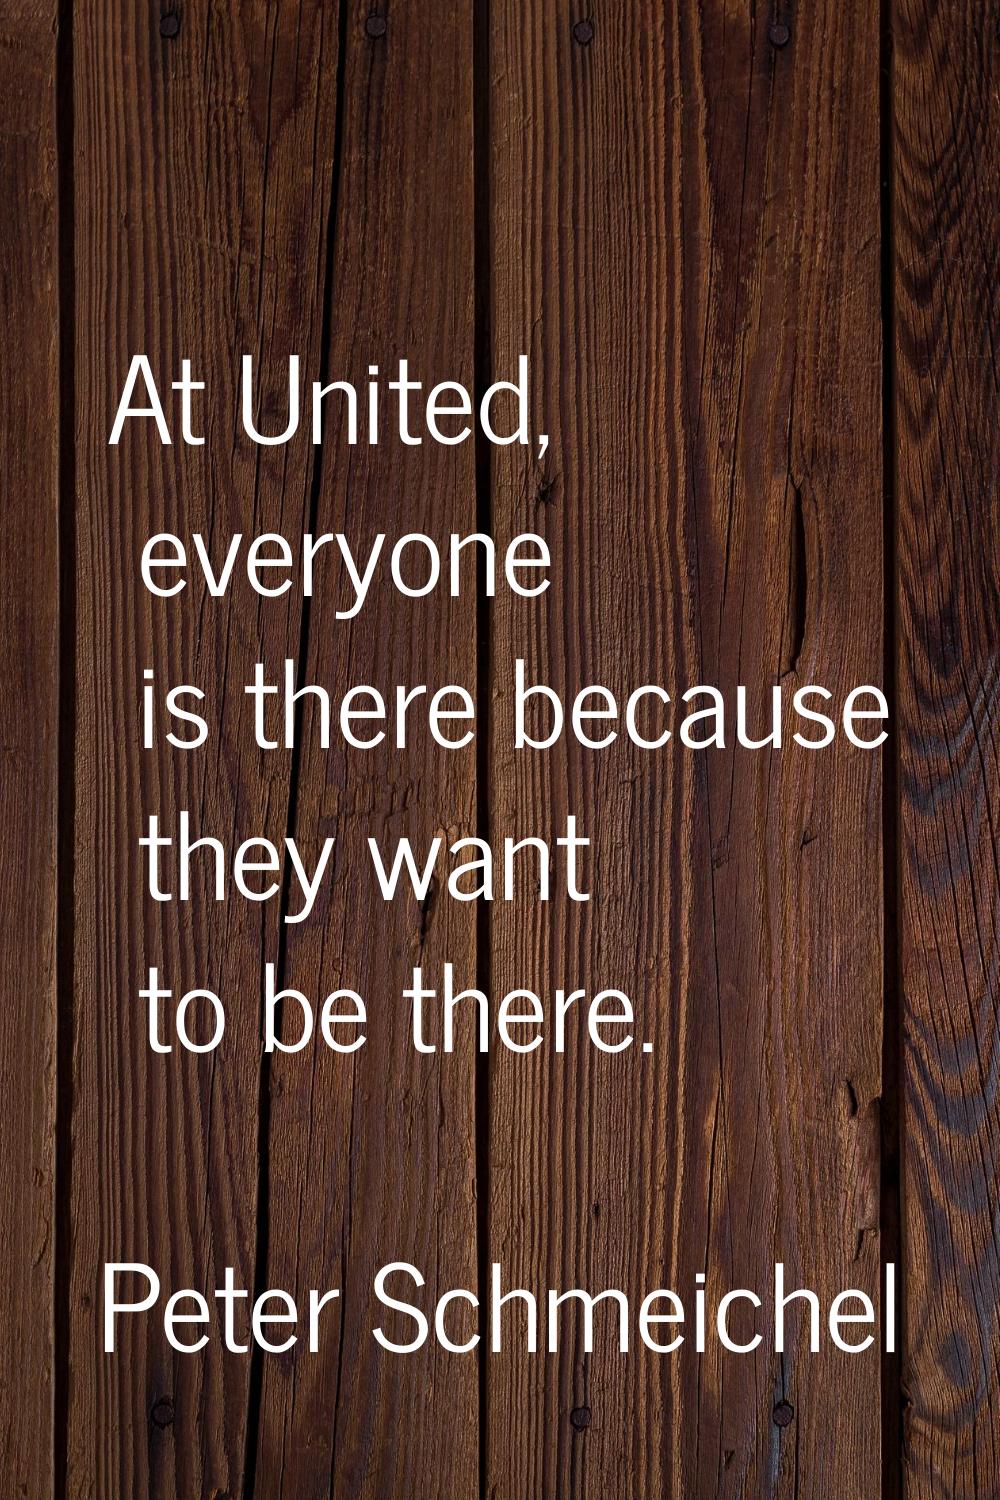 At United, everyone is there because they want to be there.